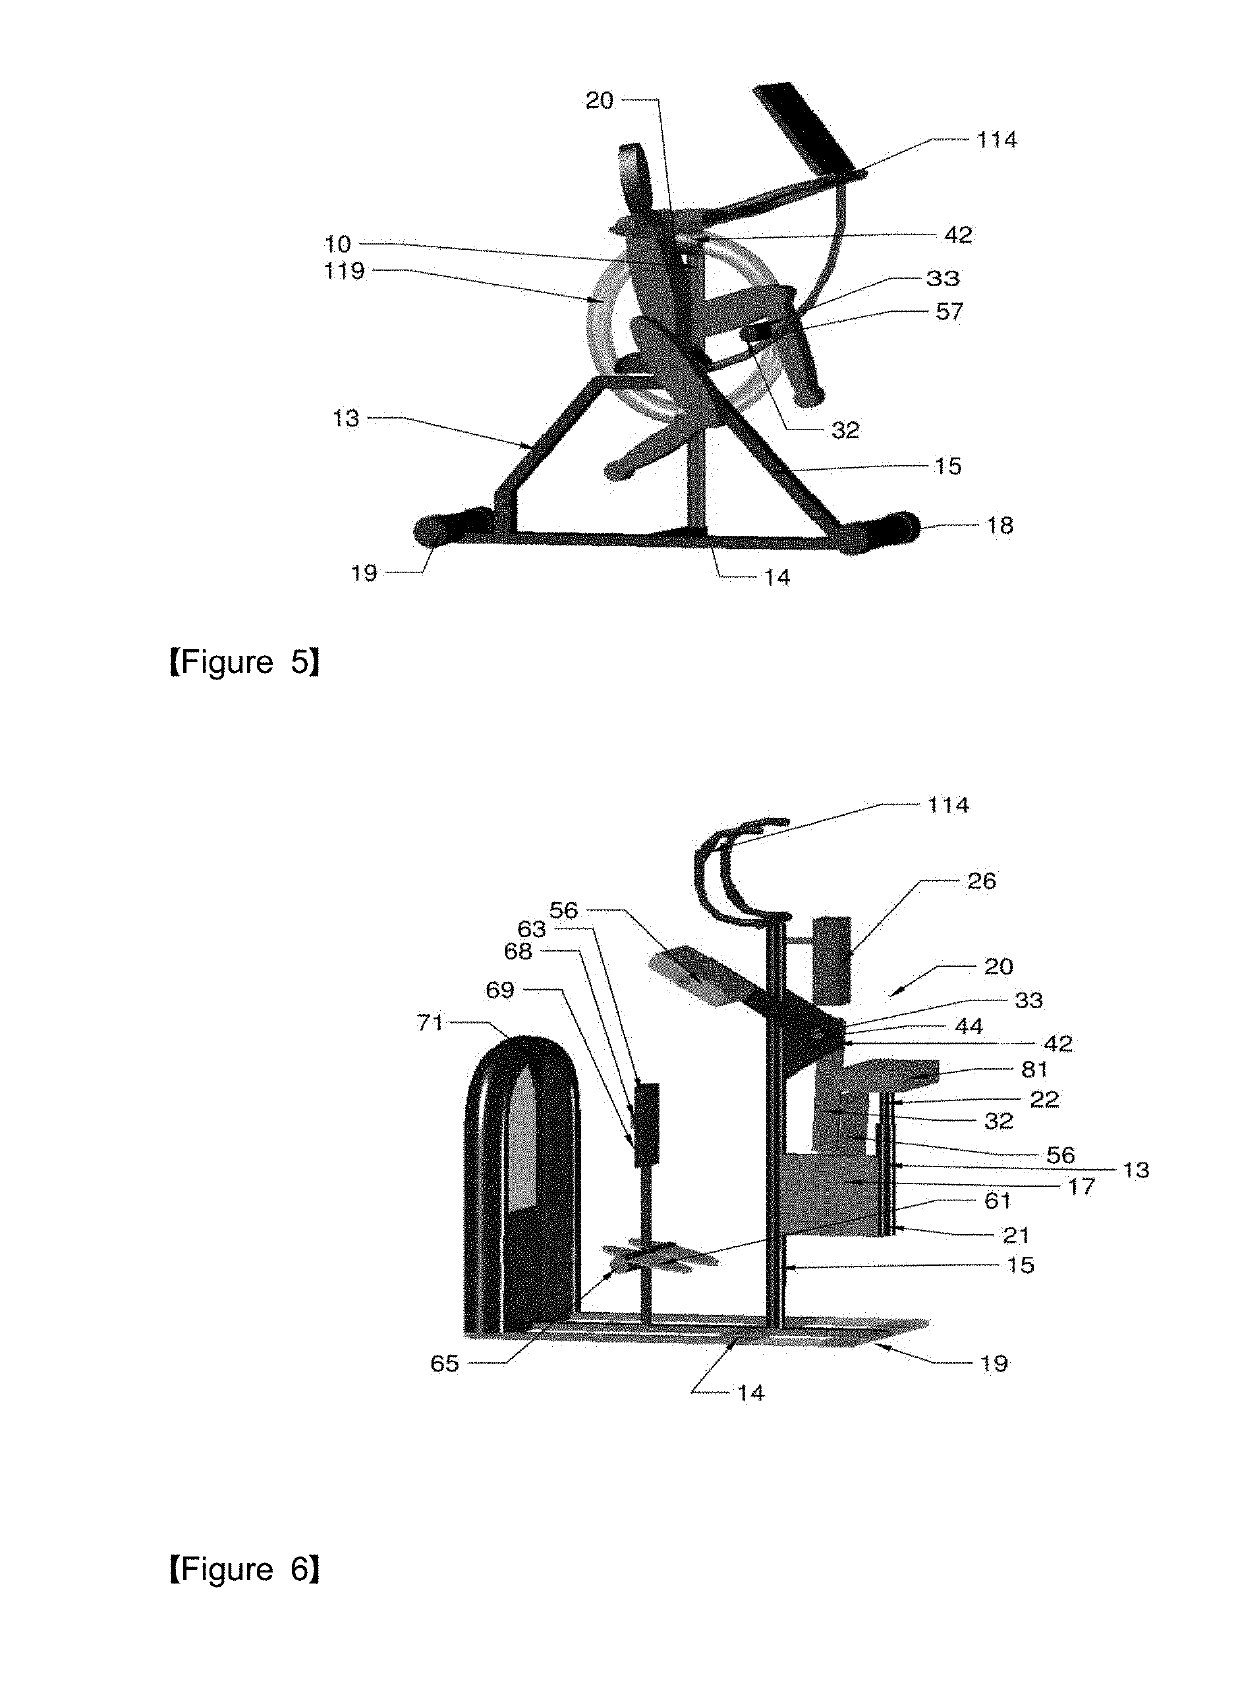 Exercise method and exercise device for exercising upper leg portions and hips while protecting knee and ankle joints